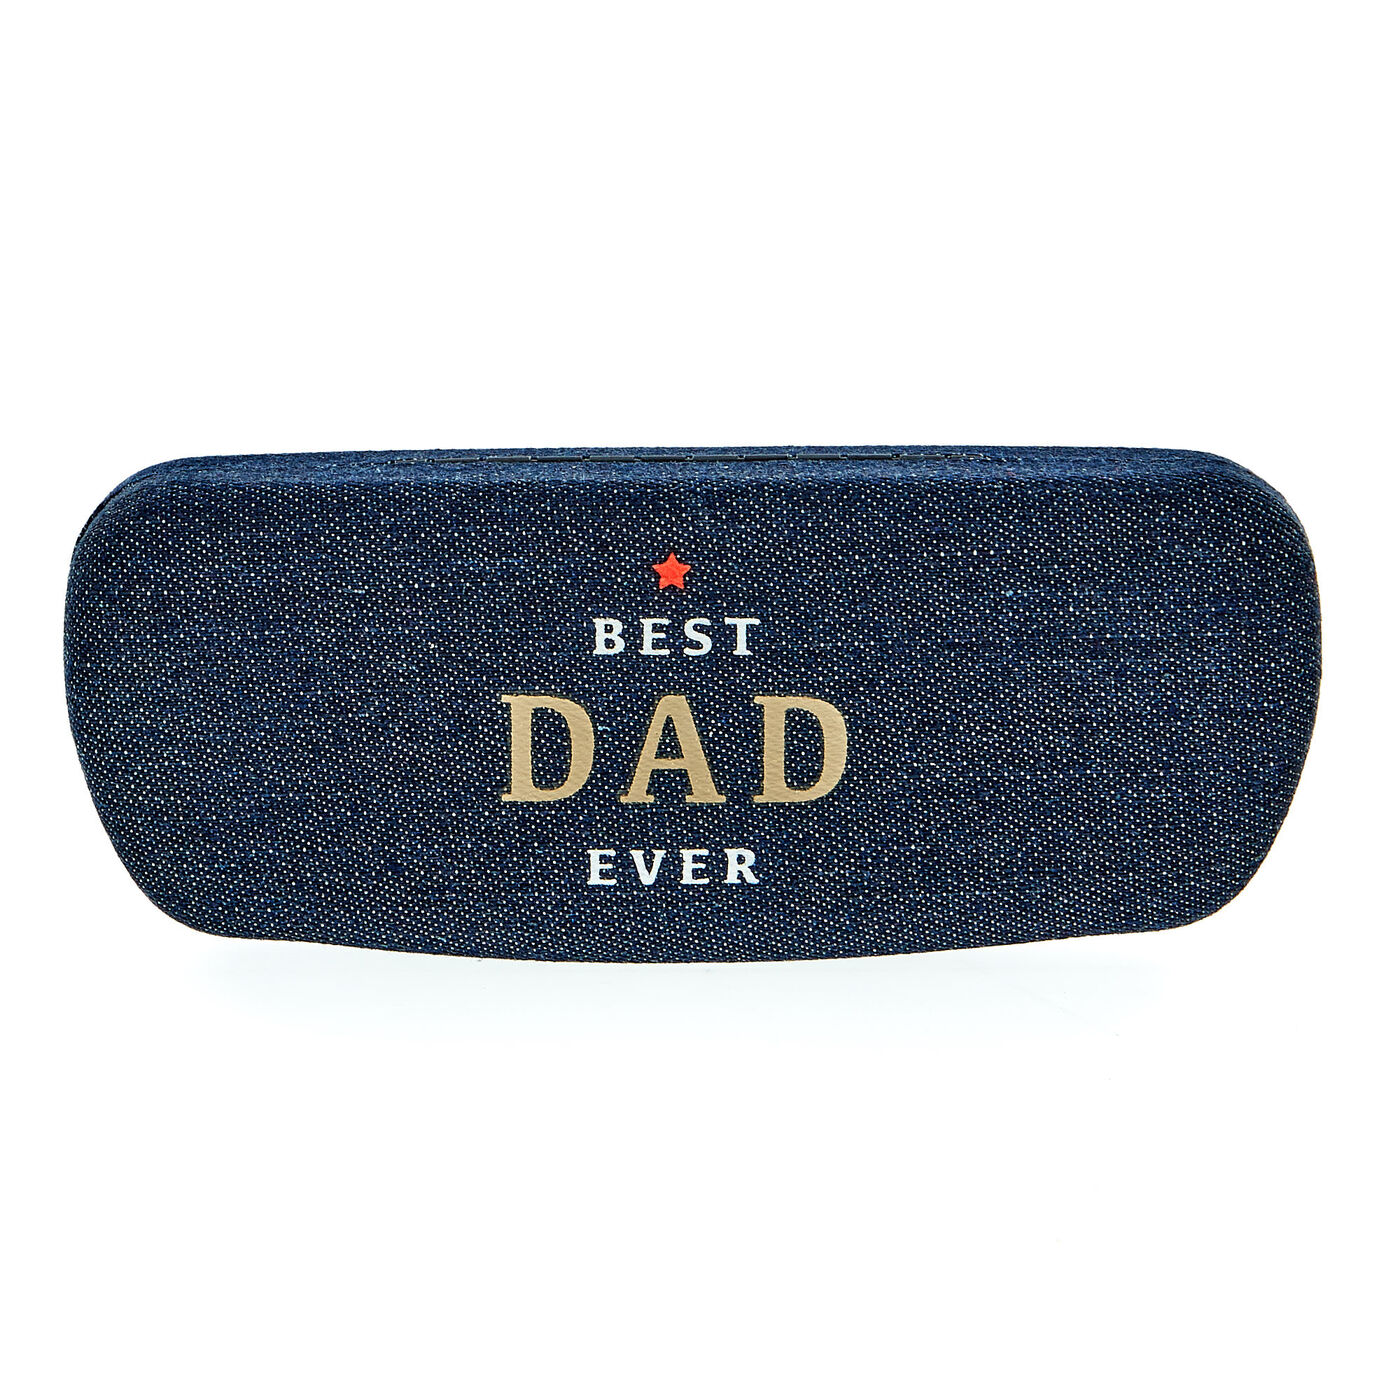 Buy Best Dad Ever Glasses Case for GBP 1.50 | Card Factory UK